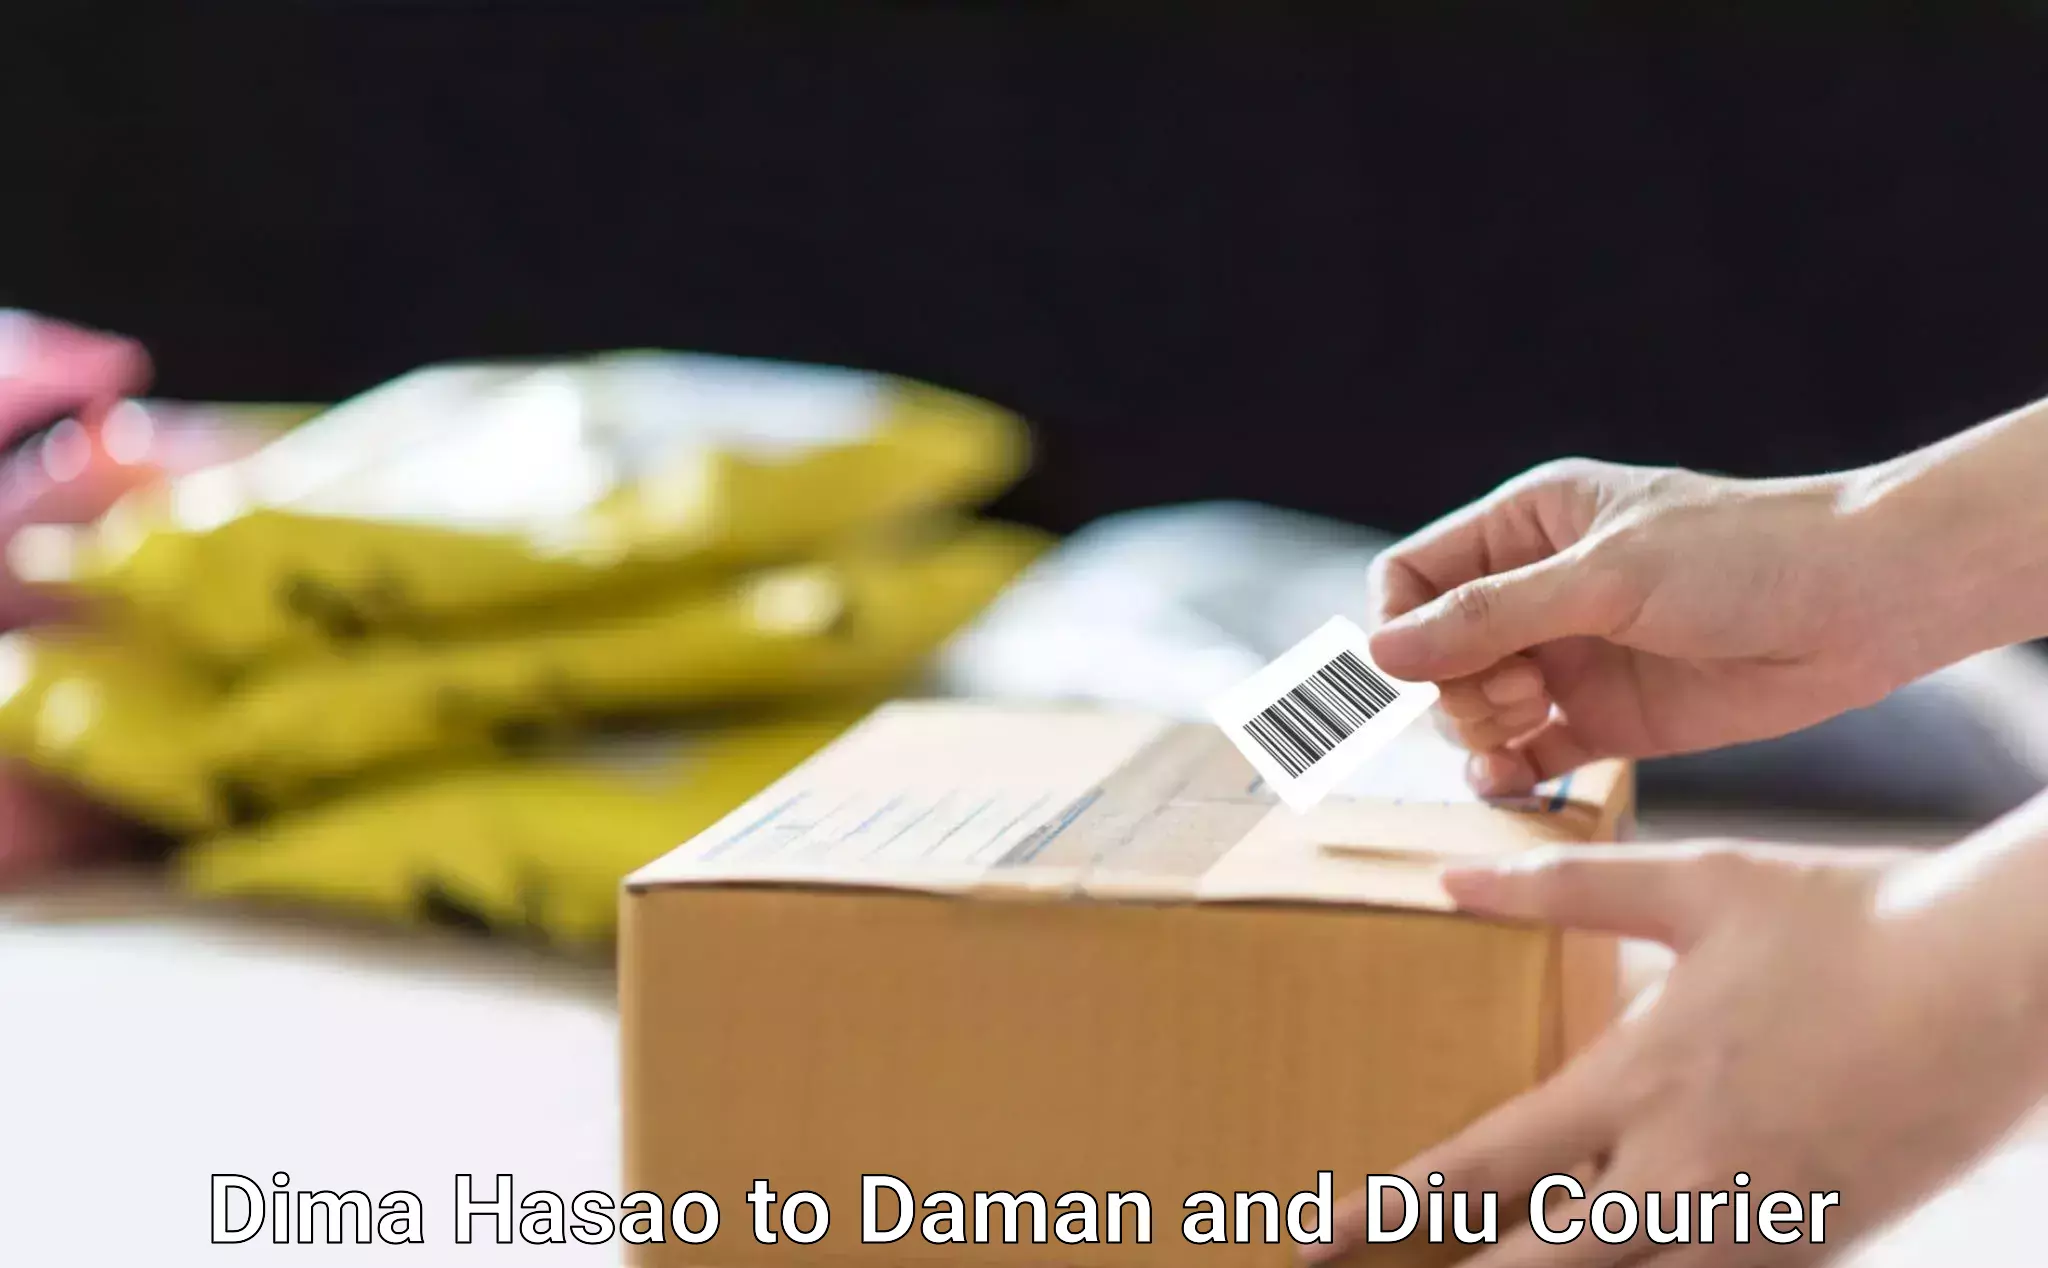 Same-day delivery options Dima Hasao to Daman and Diu